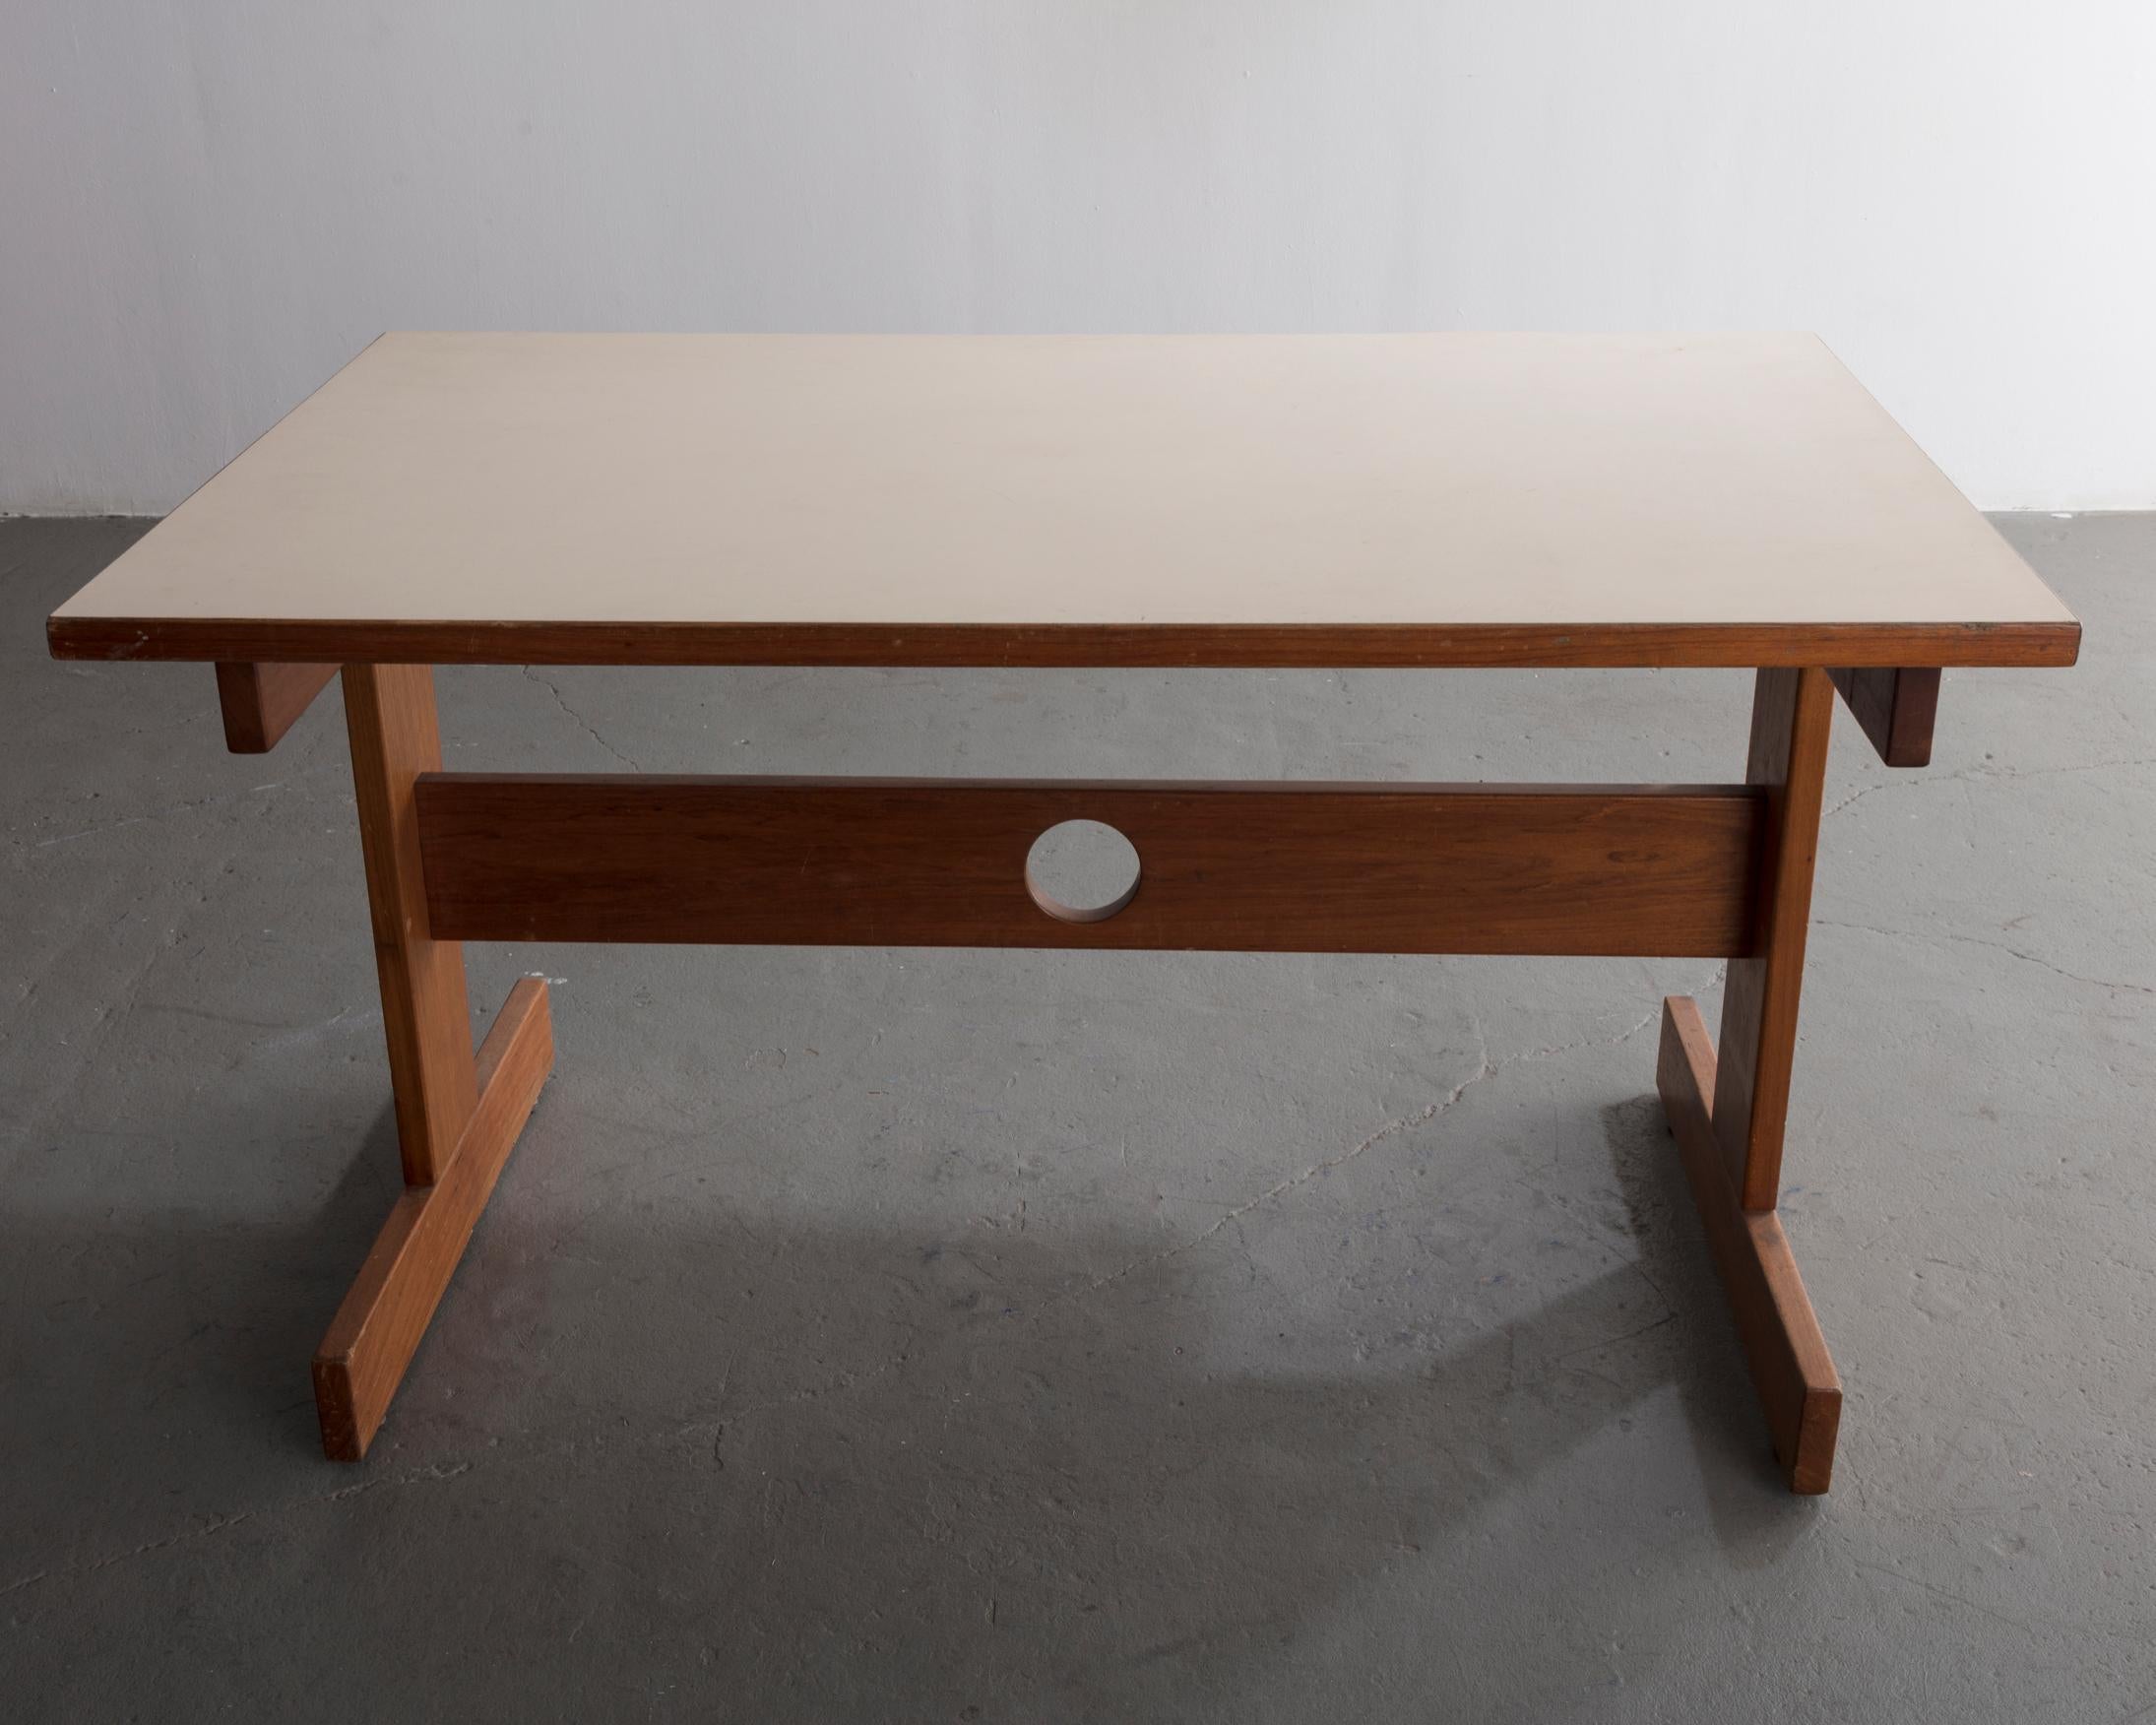 Dining table from the Cuiabá series in caviona wood with formica top. Designed by Sergio Rodrigues, Brazil, 1985.